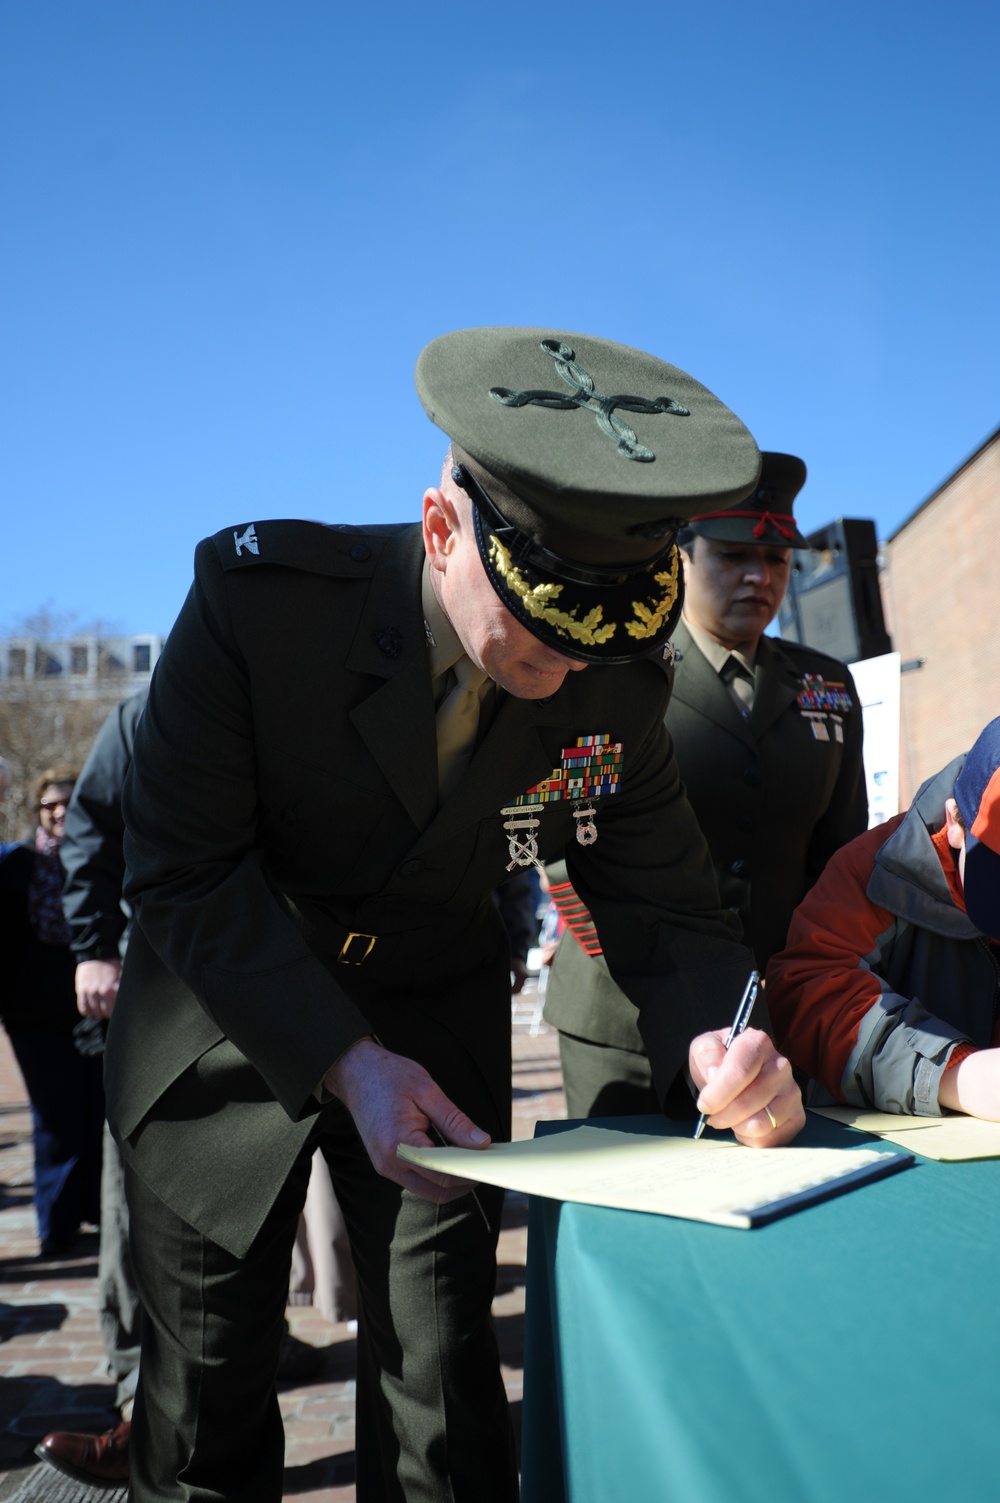 Representatives sign Armed Forces Community Covenant